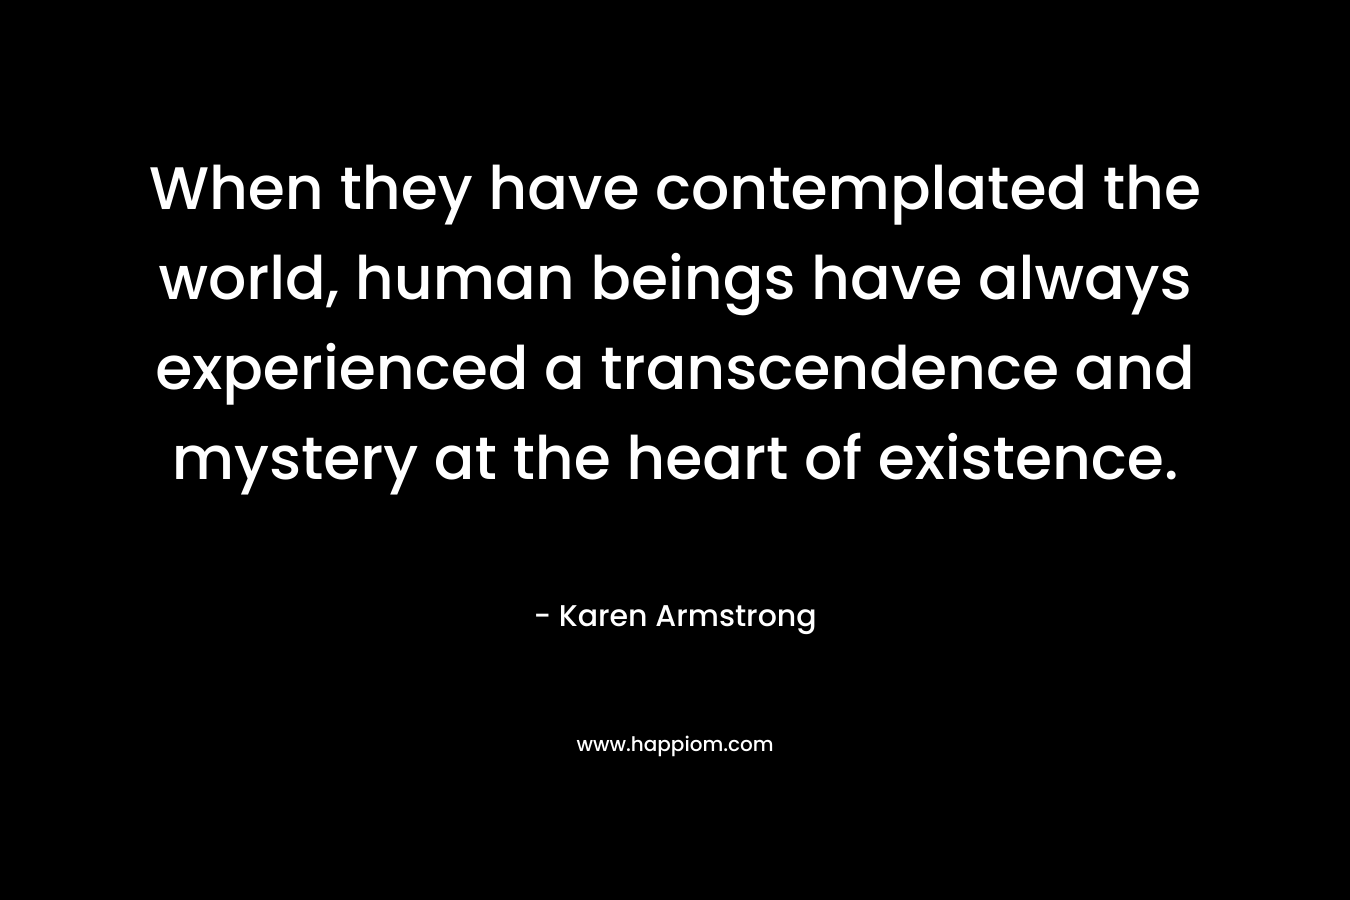 When they have contemplated the world, human beings have always experienced a transcendence and mystery at the heart of existence.